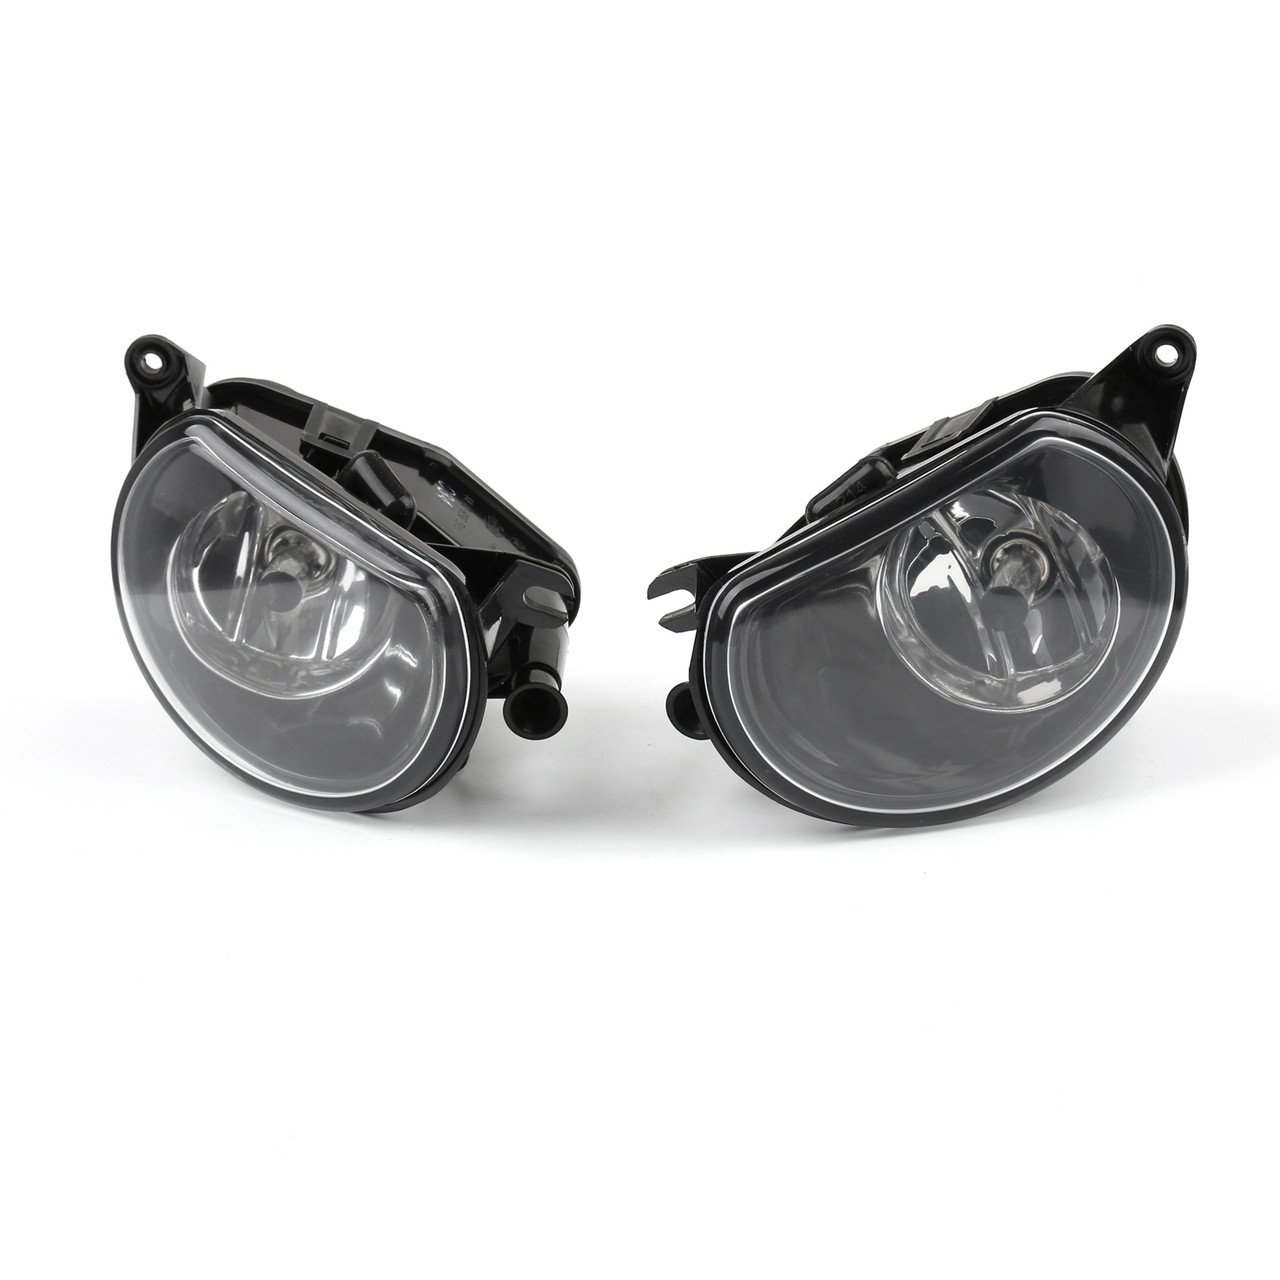 One Pair Fog Light Fit for Audi A3 (2004-2008) Q7 (2007-2009)